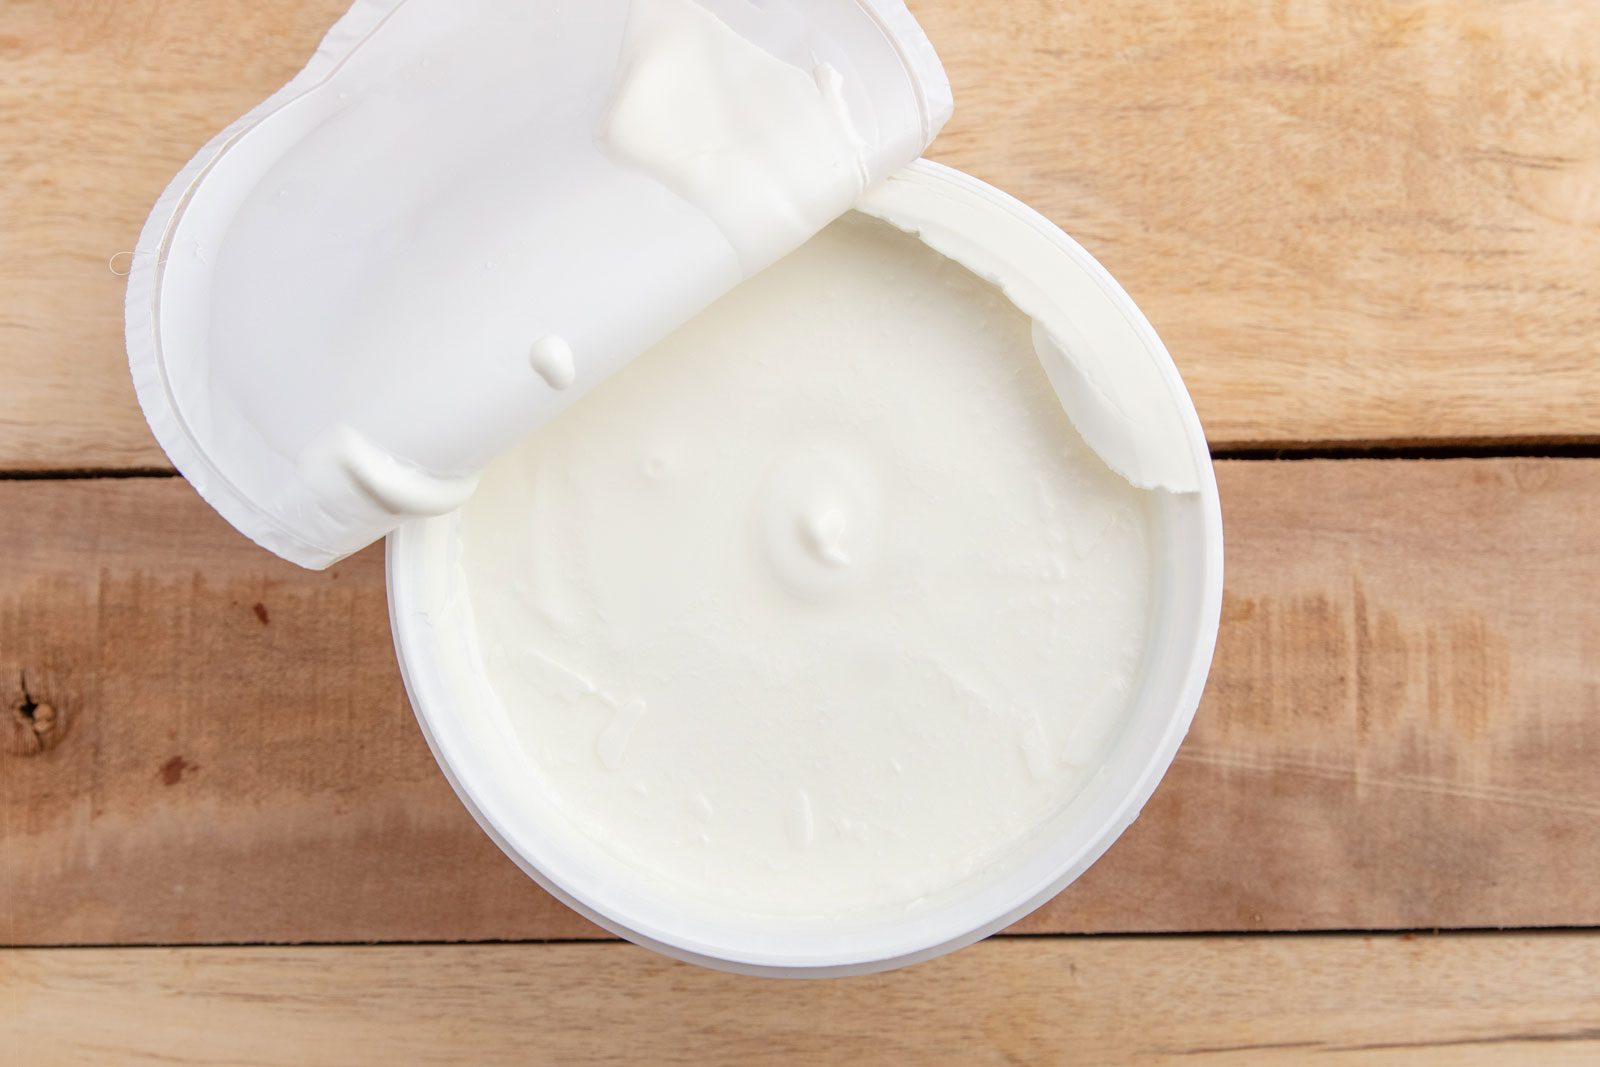 overhead view of an open container of yogurt on a wood surface